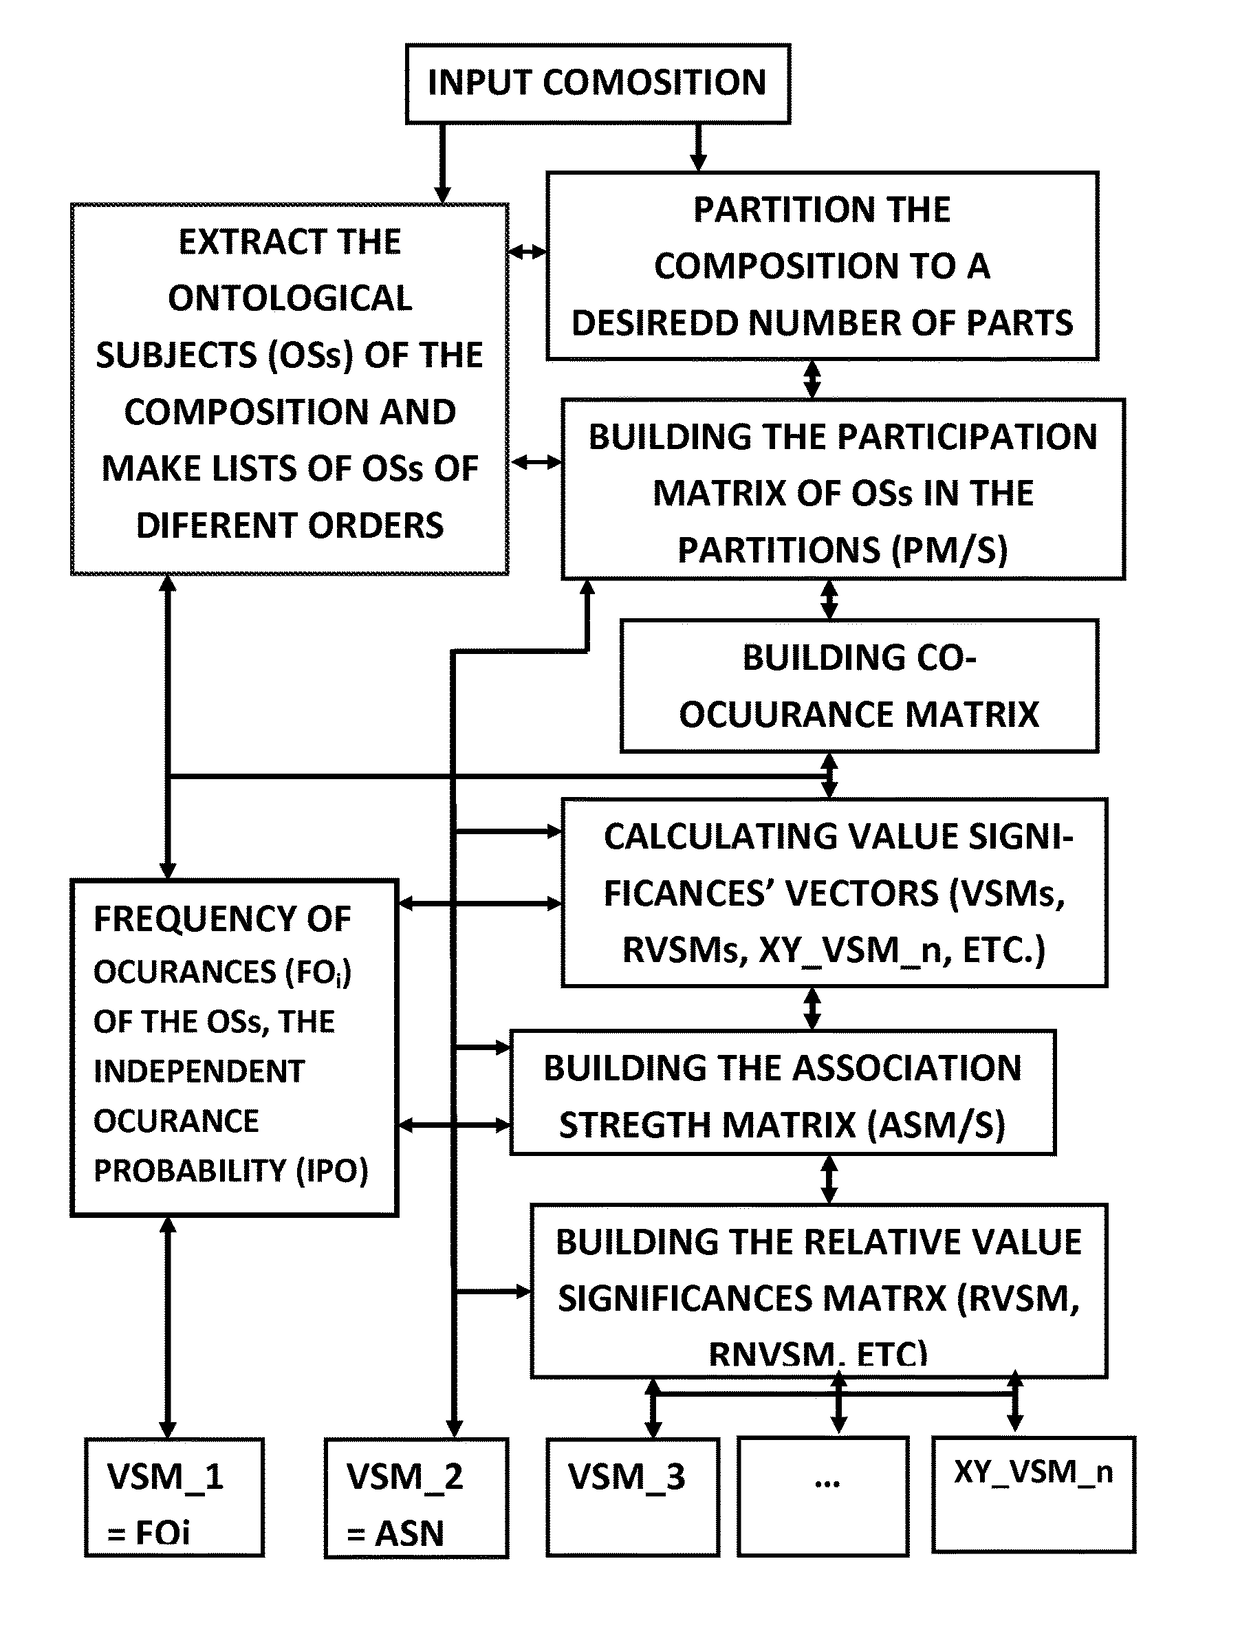 Methods and system for investigation of compositions of ontological subjects